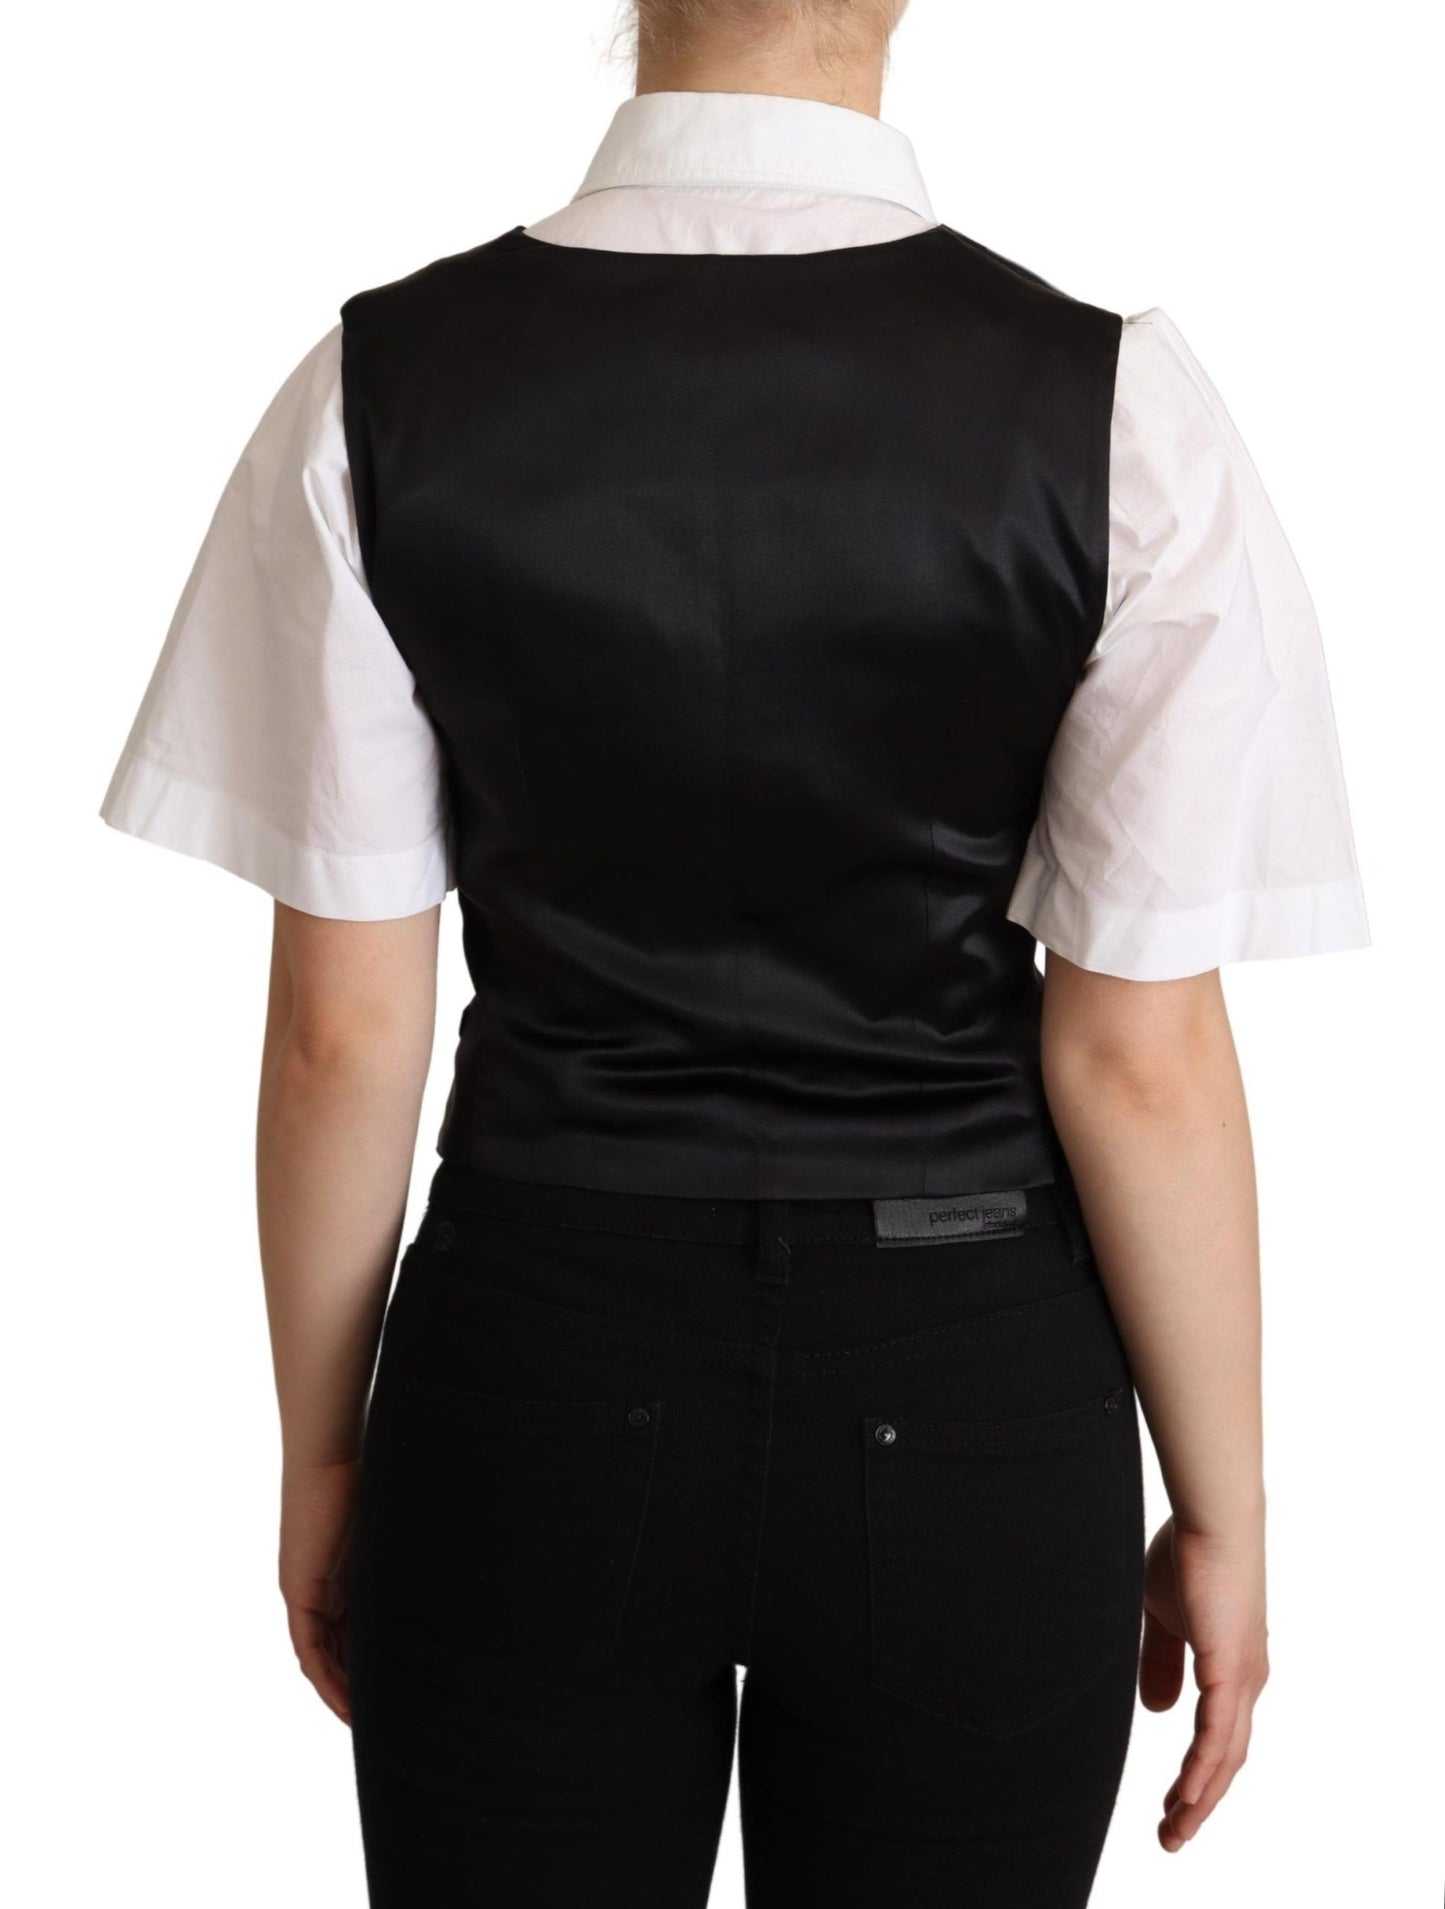 Dolce & Gabbana Black Silk Sleeveless Waistcoat Vest - Designed by Dolce & Gabbana Available to Buy at a Discounted Price on Moon Behind The Hill Online Designer Discount Store